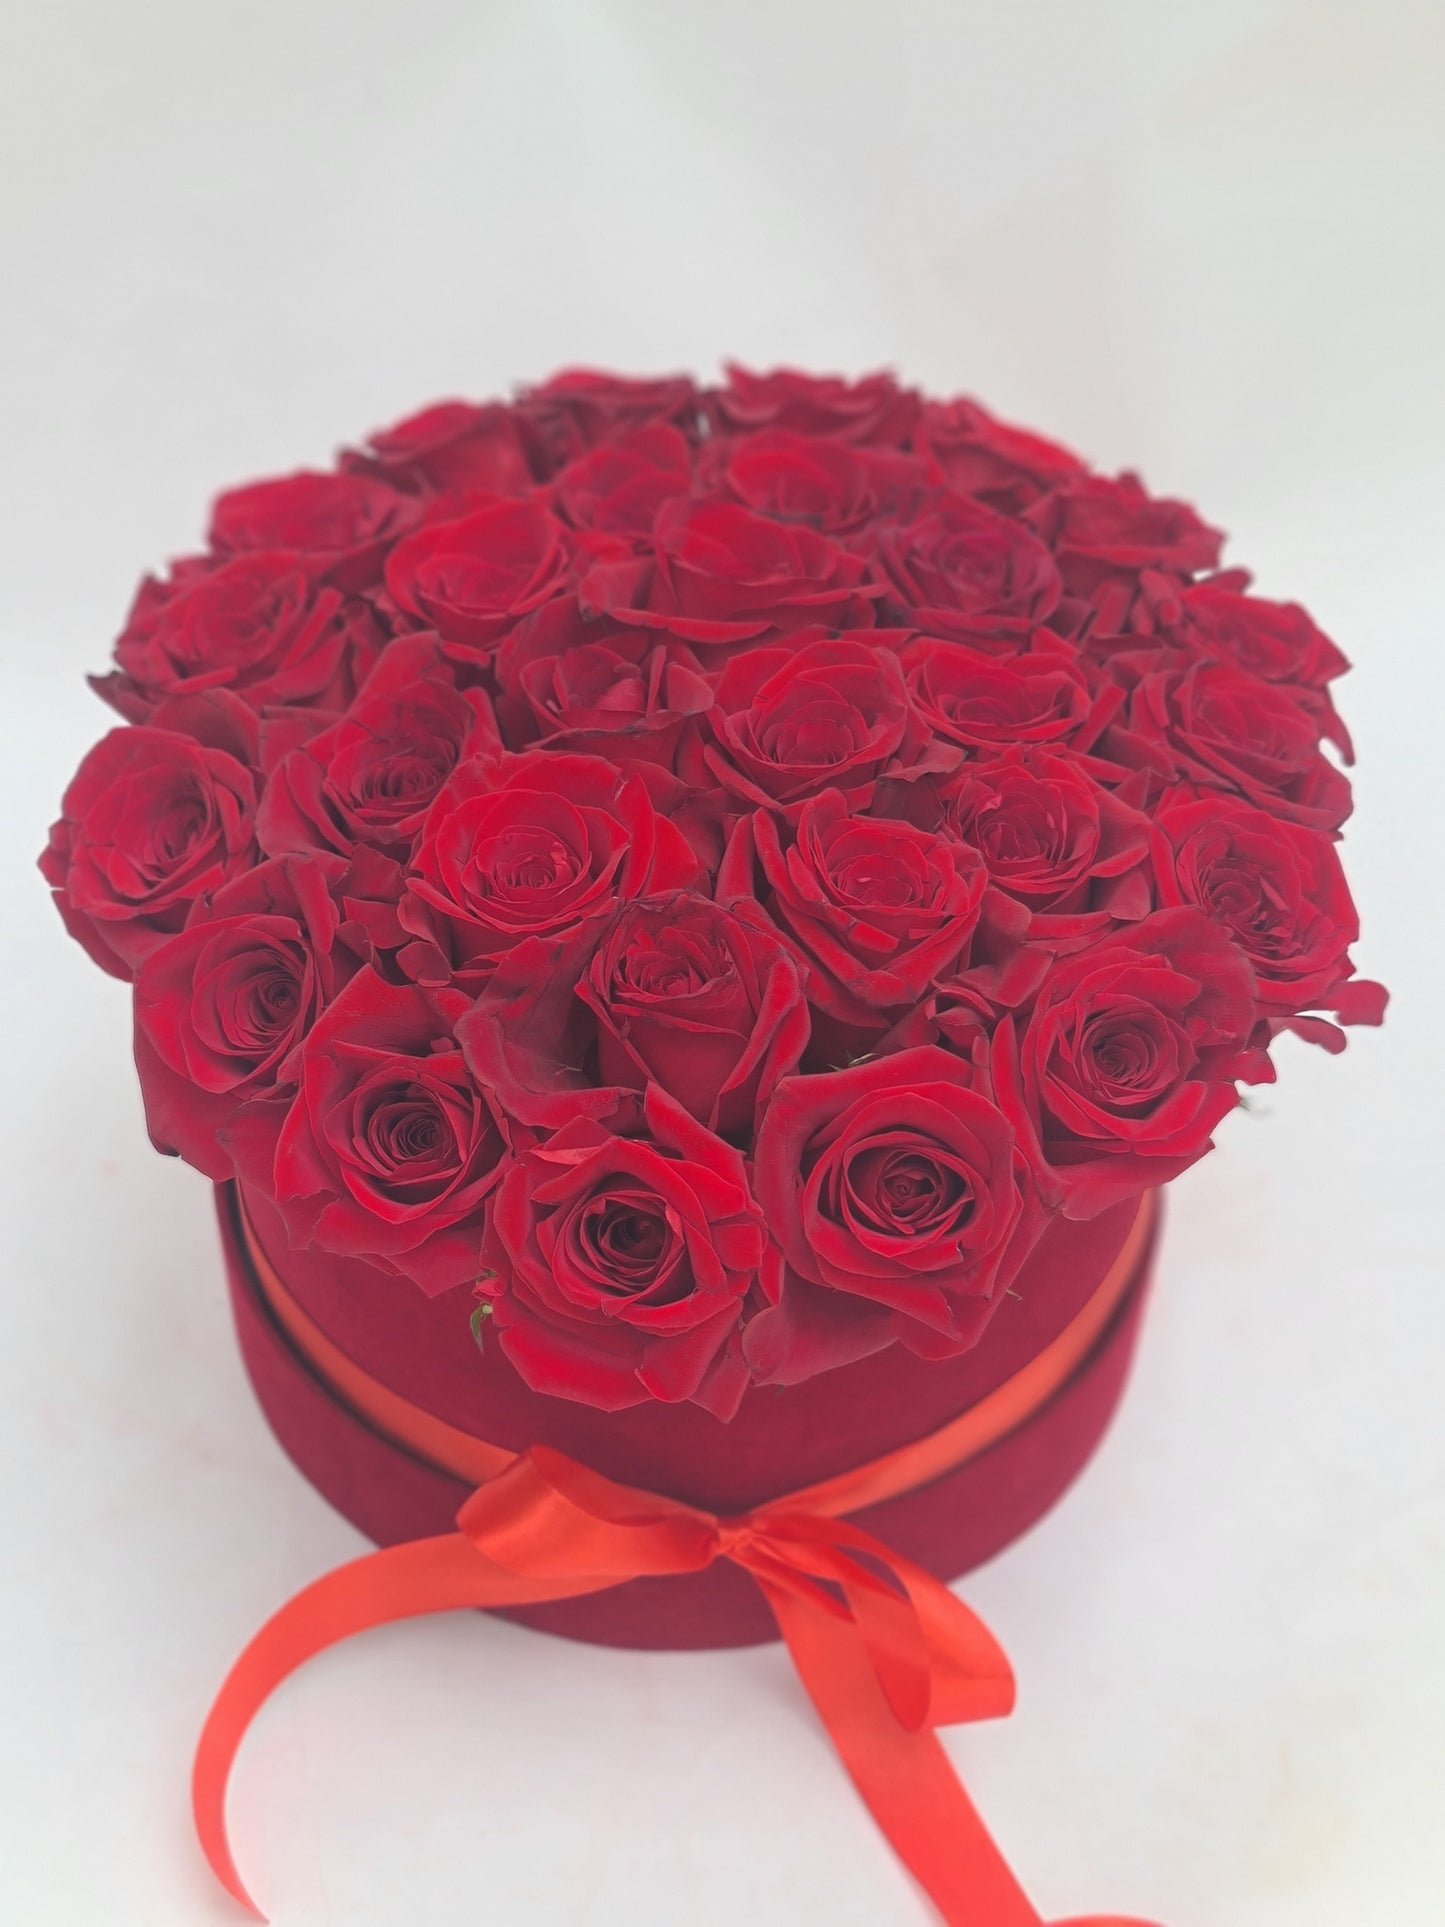 BOX OF ROUND RED ROSES